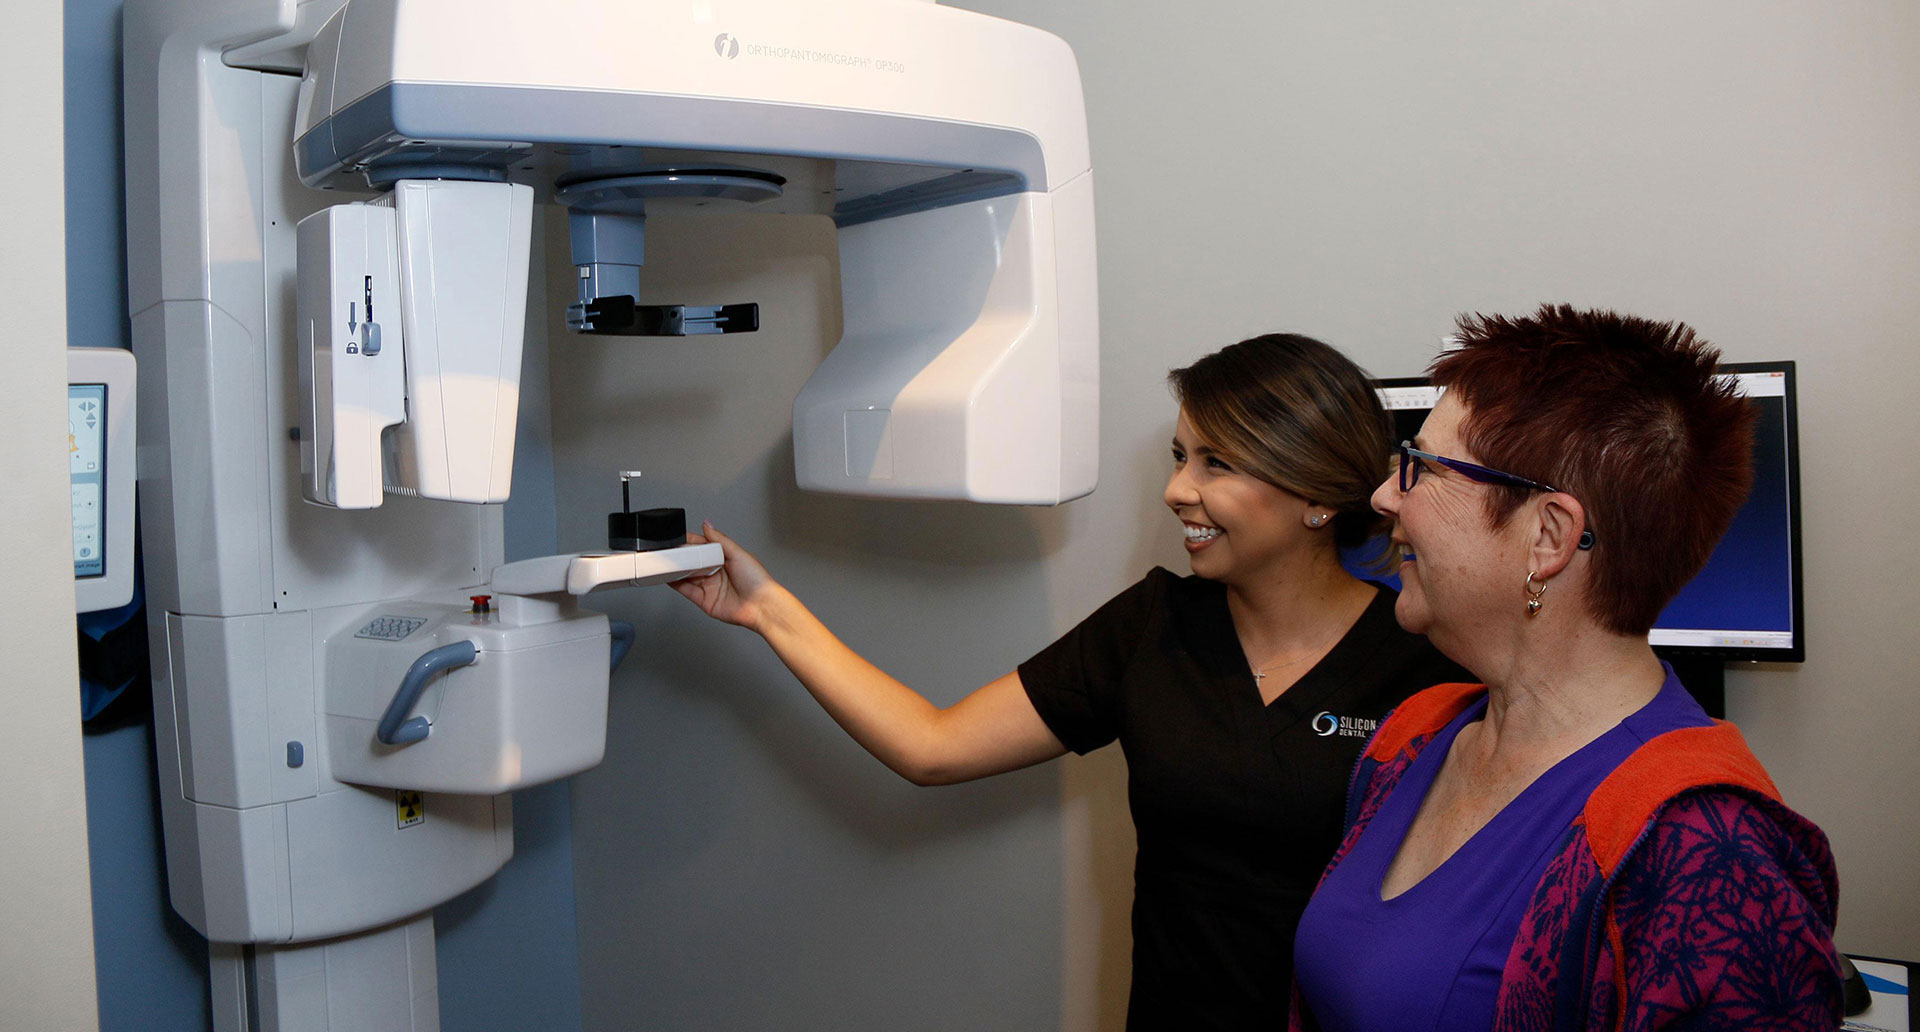 This is an image featuring two individuals, one of whom appears to be operating a dental or medical device, possibly a scanner or X-ray machine. The setting suggests a professional environment, likely a dental or medical office.